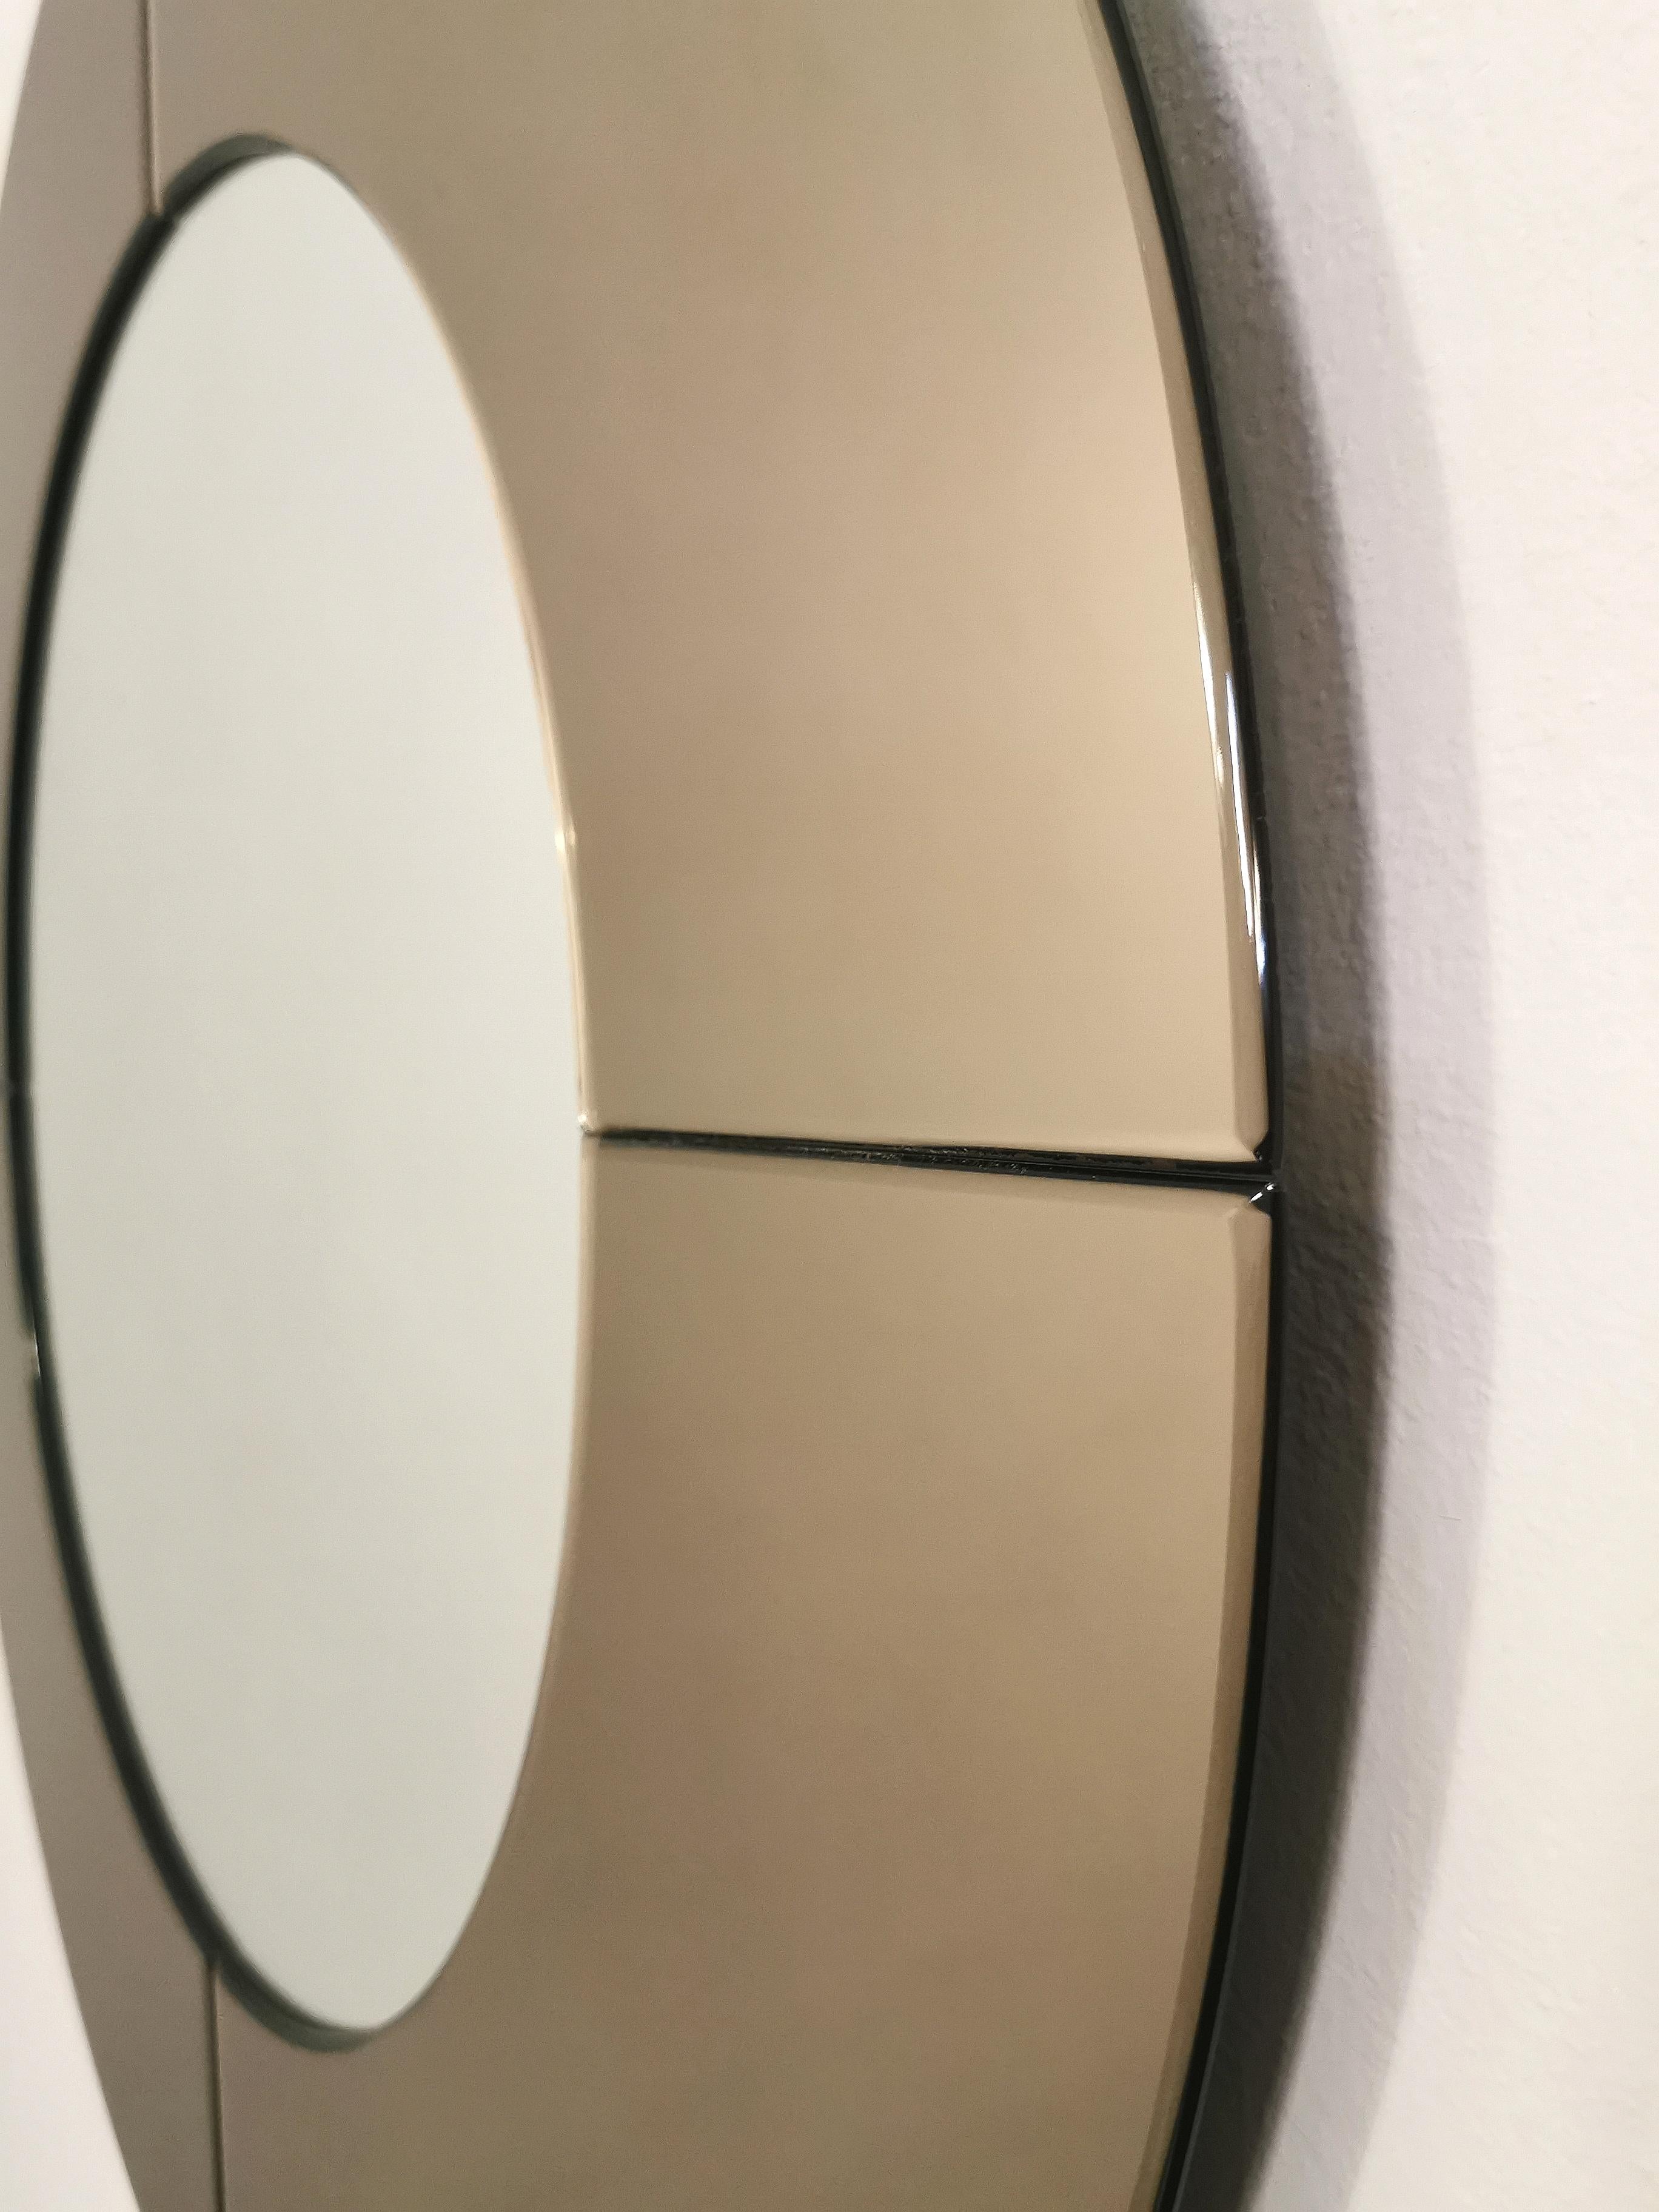 Midcentury Wall Mirror Mirrored Glass Smoked Round Large Italian Design 1970s In Good Condition For Sale In Palermo, IT